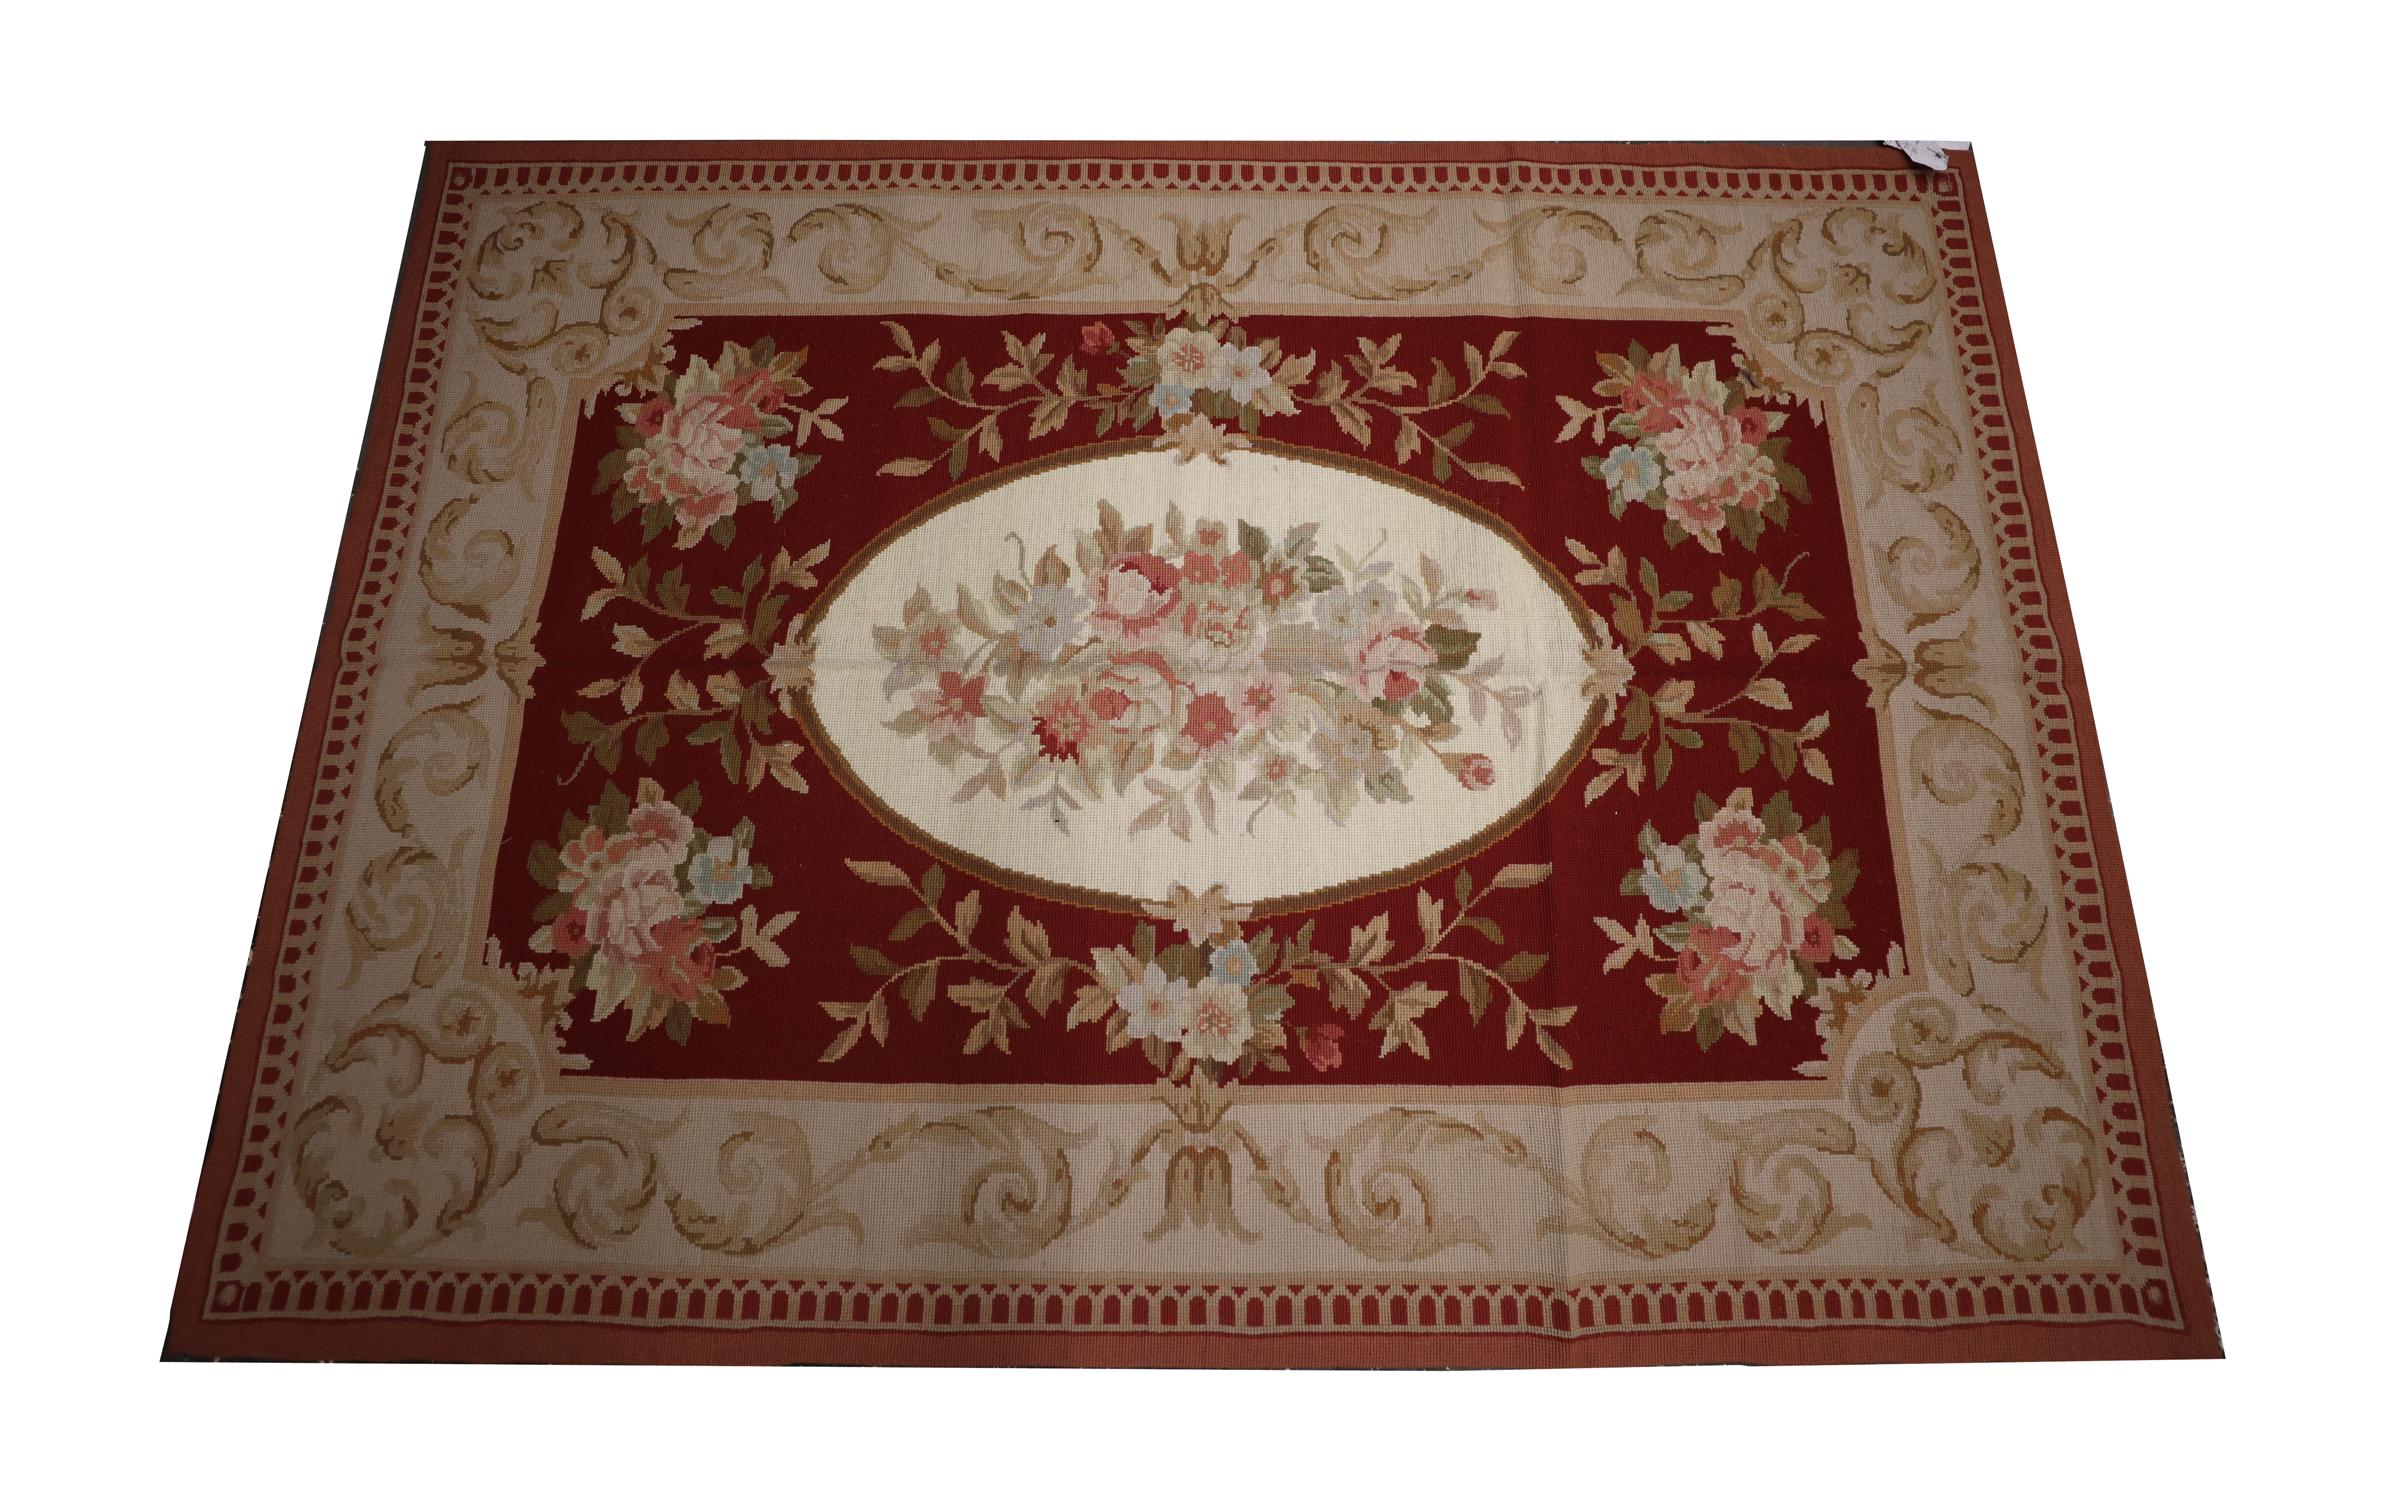 This New English style needlepoint was handwoven in the early 21st century and features a traditional Aubusson design with an oval central medallion and symmetrical surrounding design. Woven with an elegant colour palette of deep red, beige and